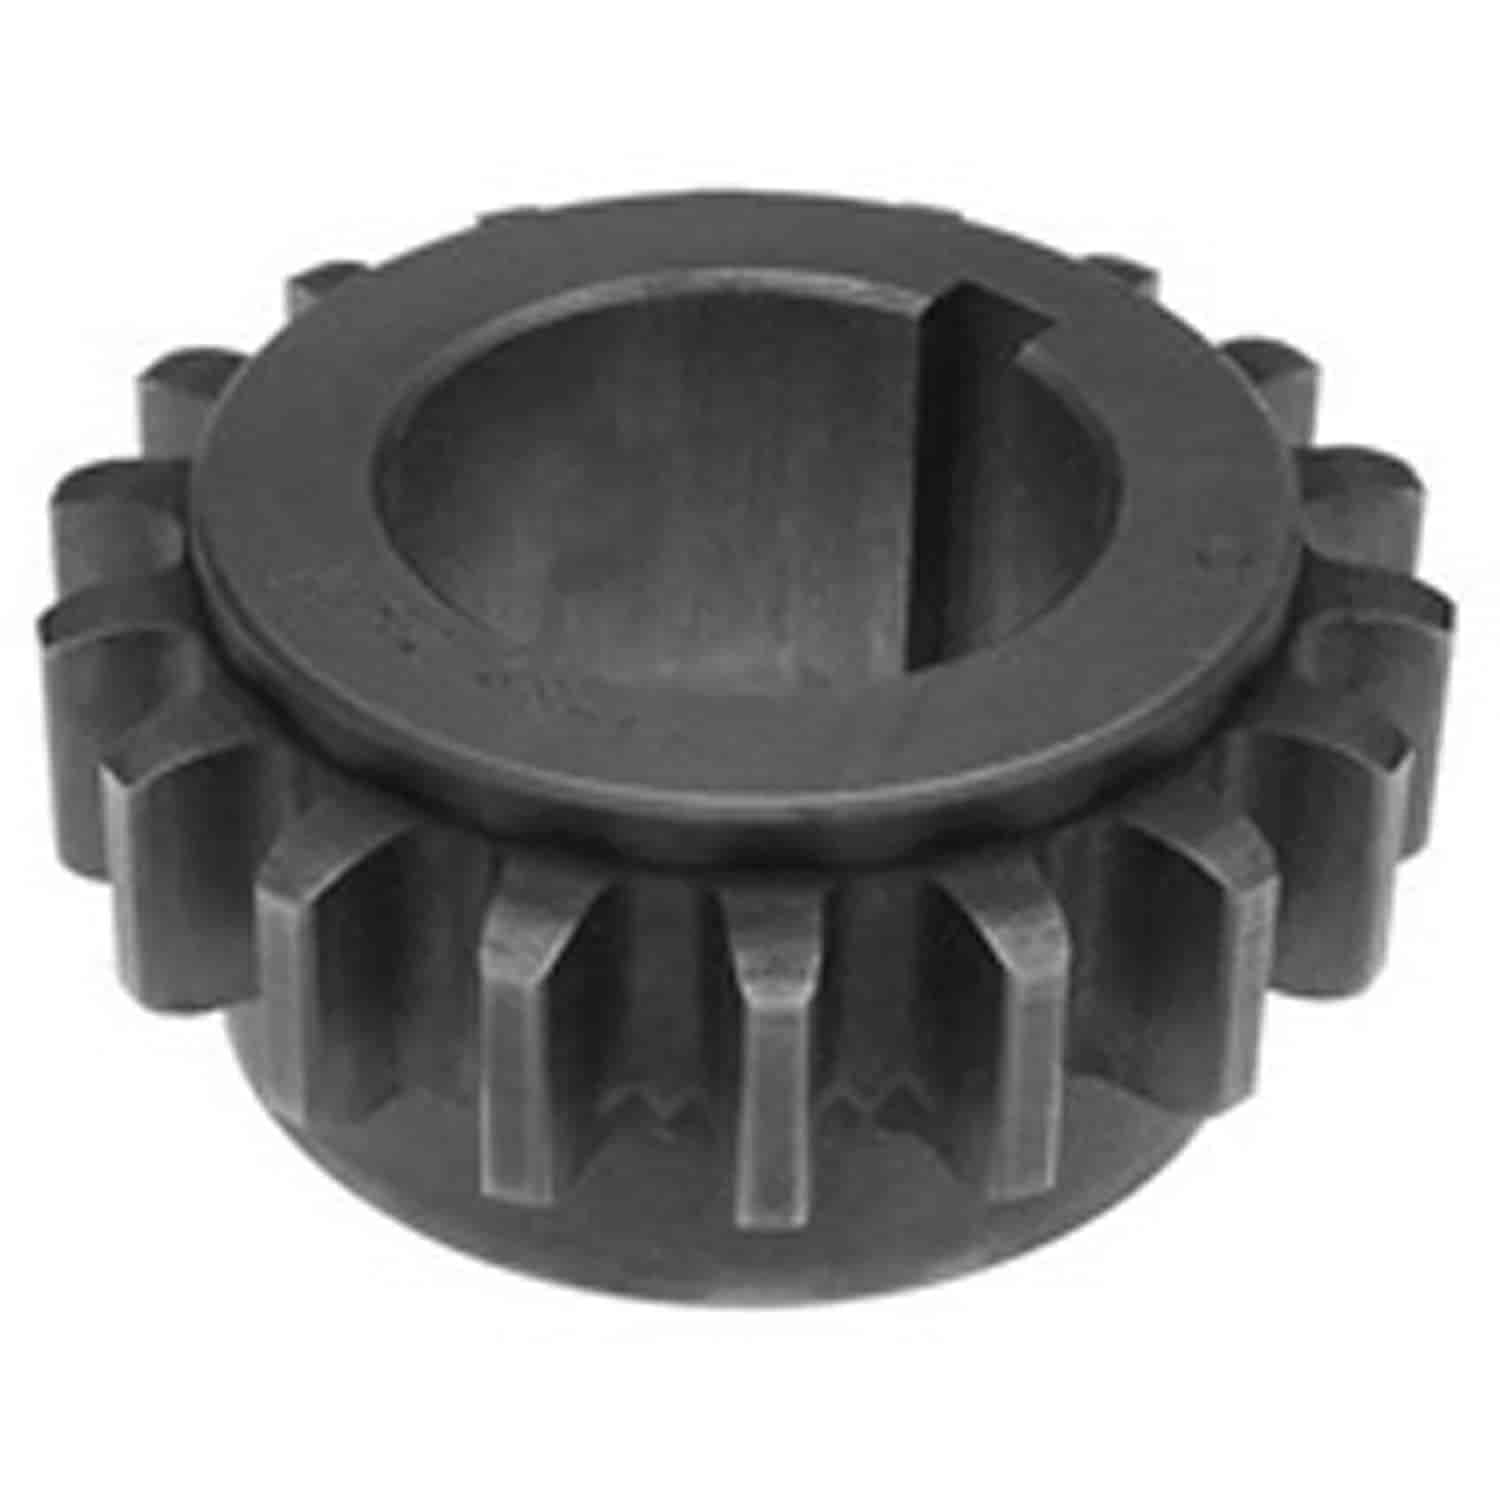 Crankshaft Timing Gear, 18 tooth for 1954-1963 Willys